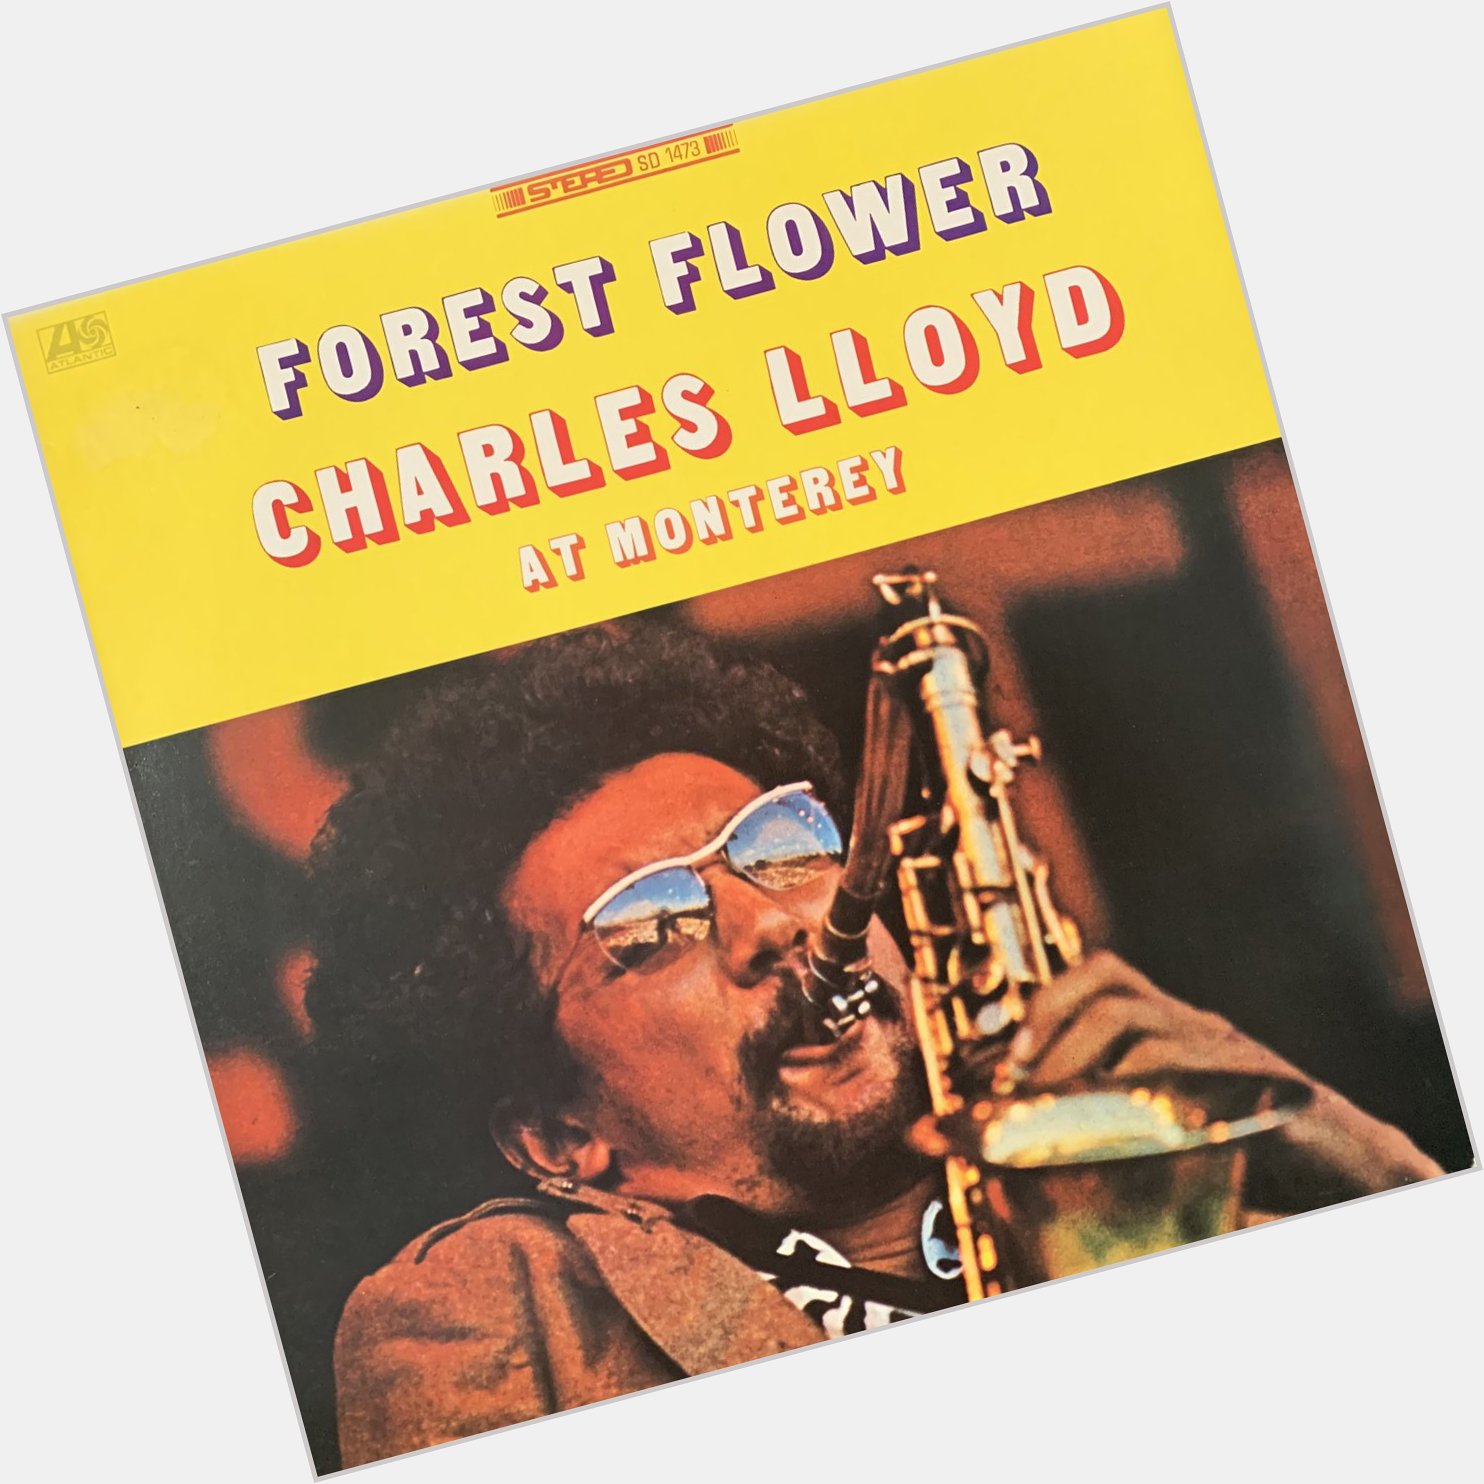  Forest Flower / Charles Lloyd At Monterey Cecil McBee (bass)
Happy Birthday   